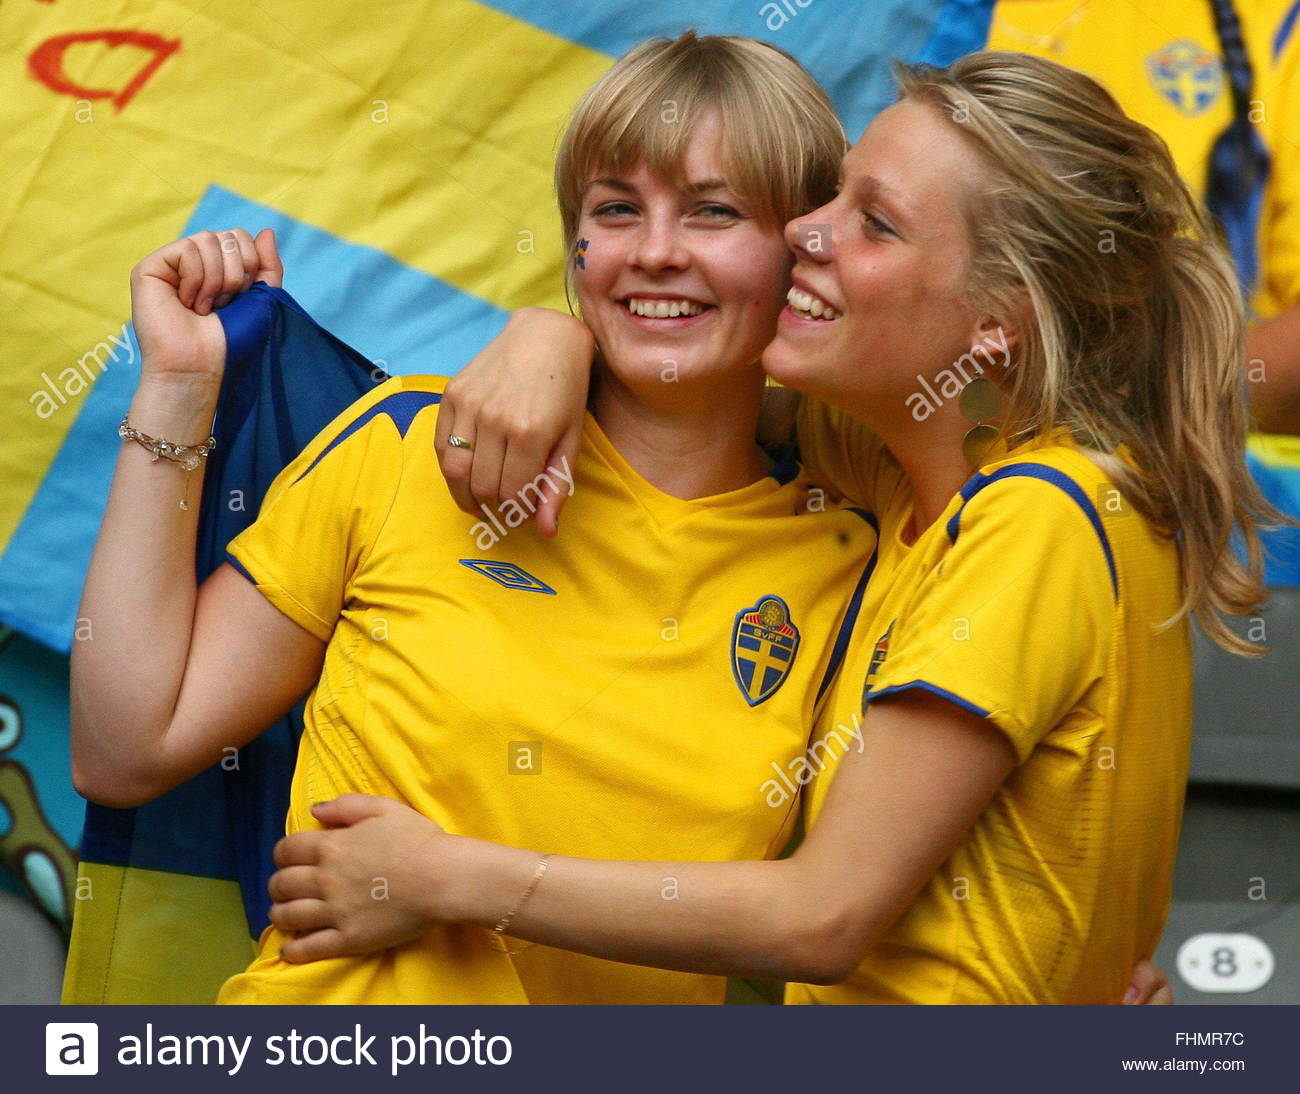 swedish-supporters-cheer-prior-to-the-group-b-preliminary-round-match-FHMR7C.jpg